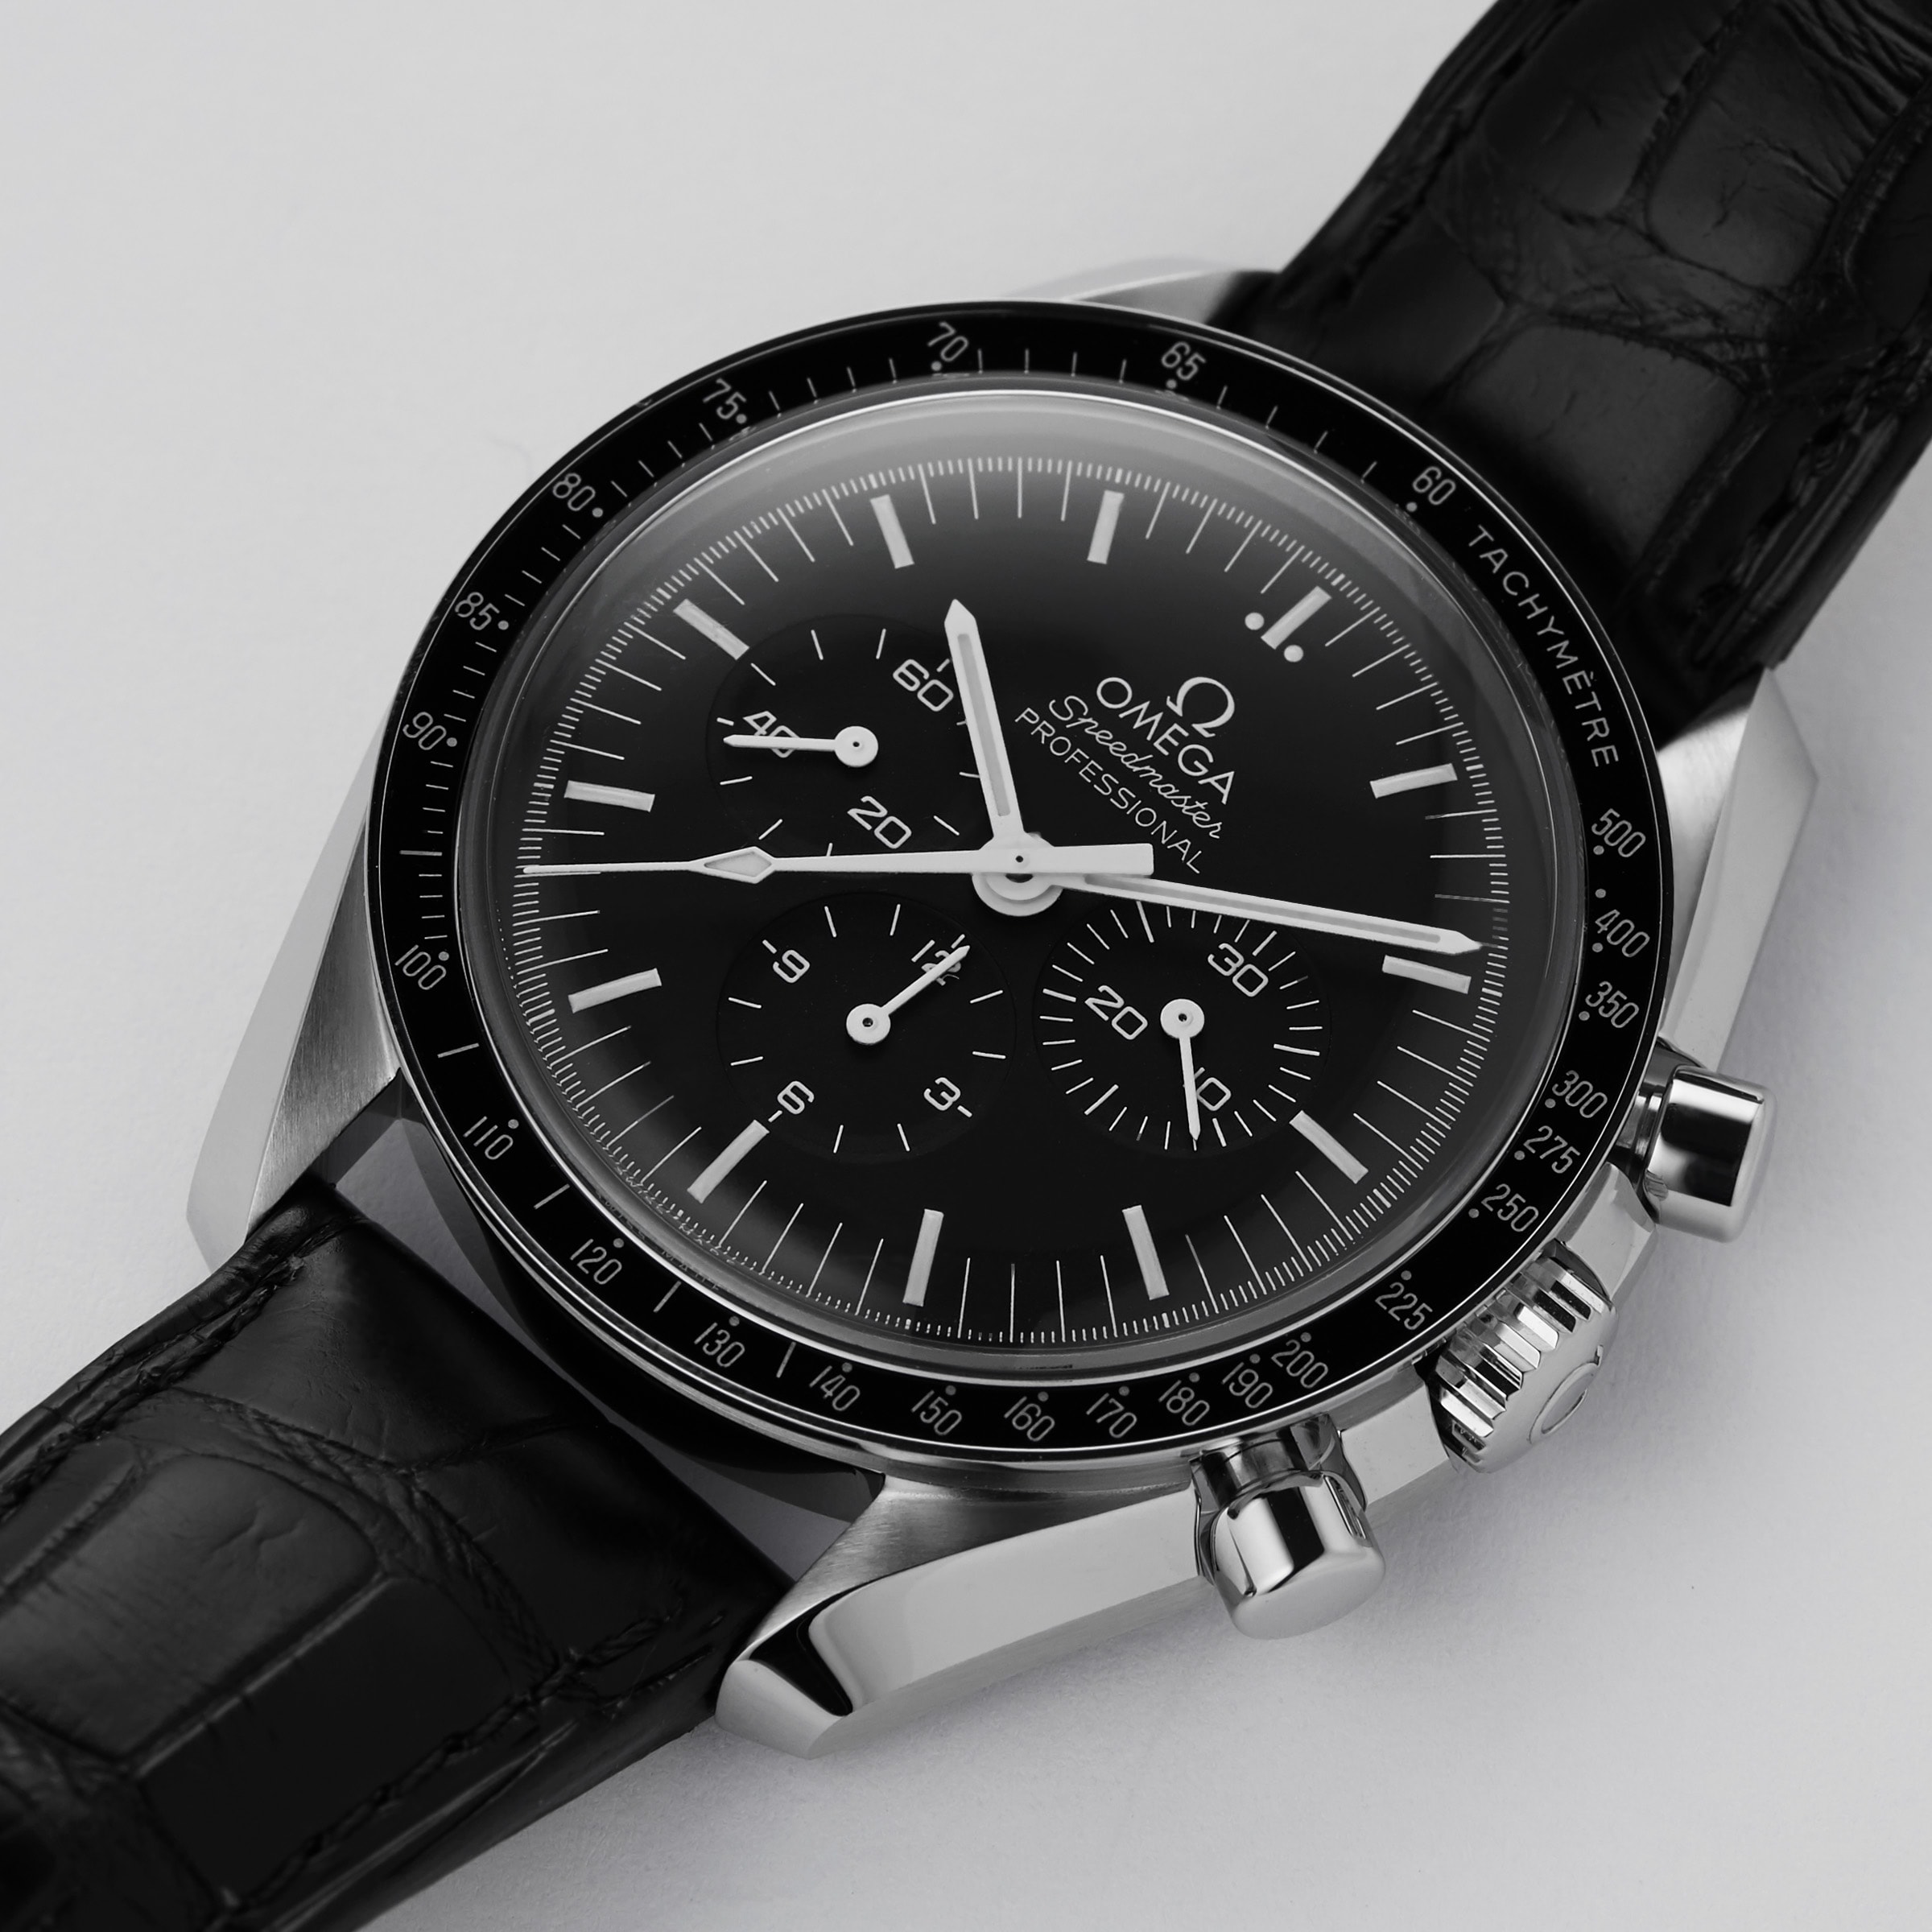 The Omega Speedmaster Isn't the Only Moon Watch | Gear Patrol